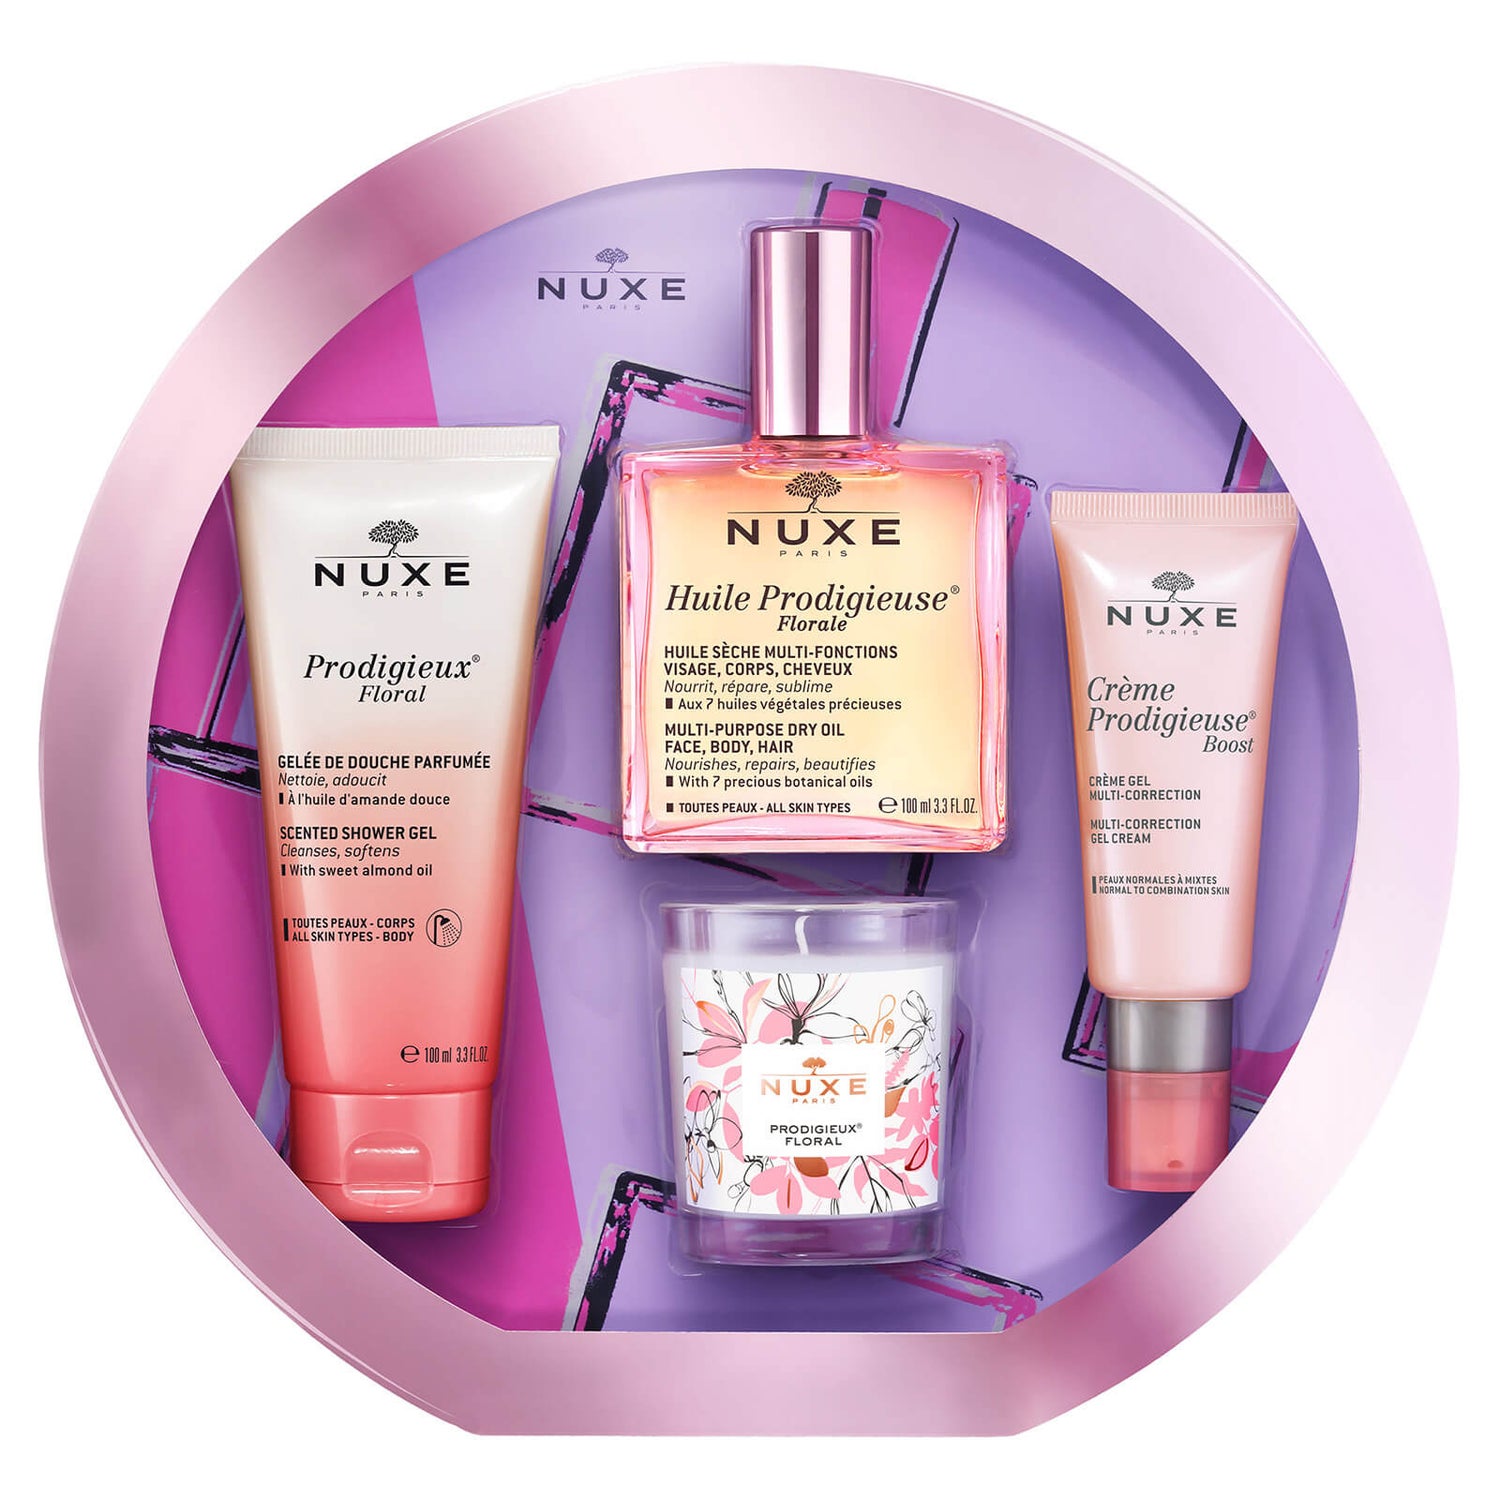 NUXE Prodigiously Floral Gift Set